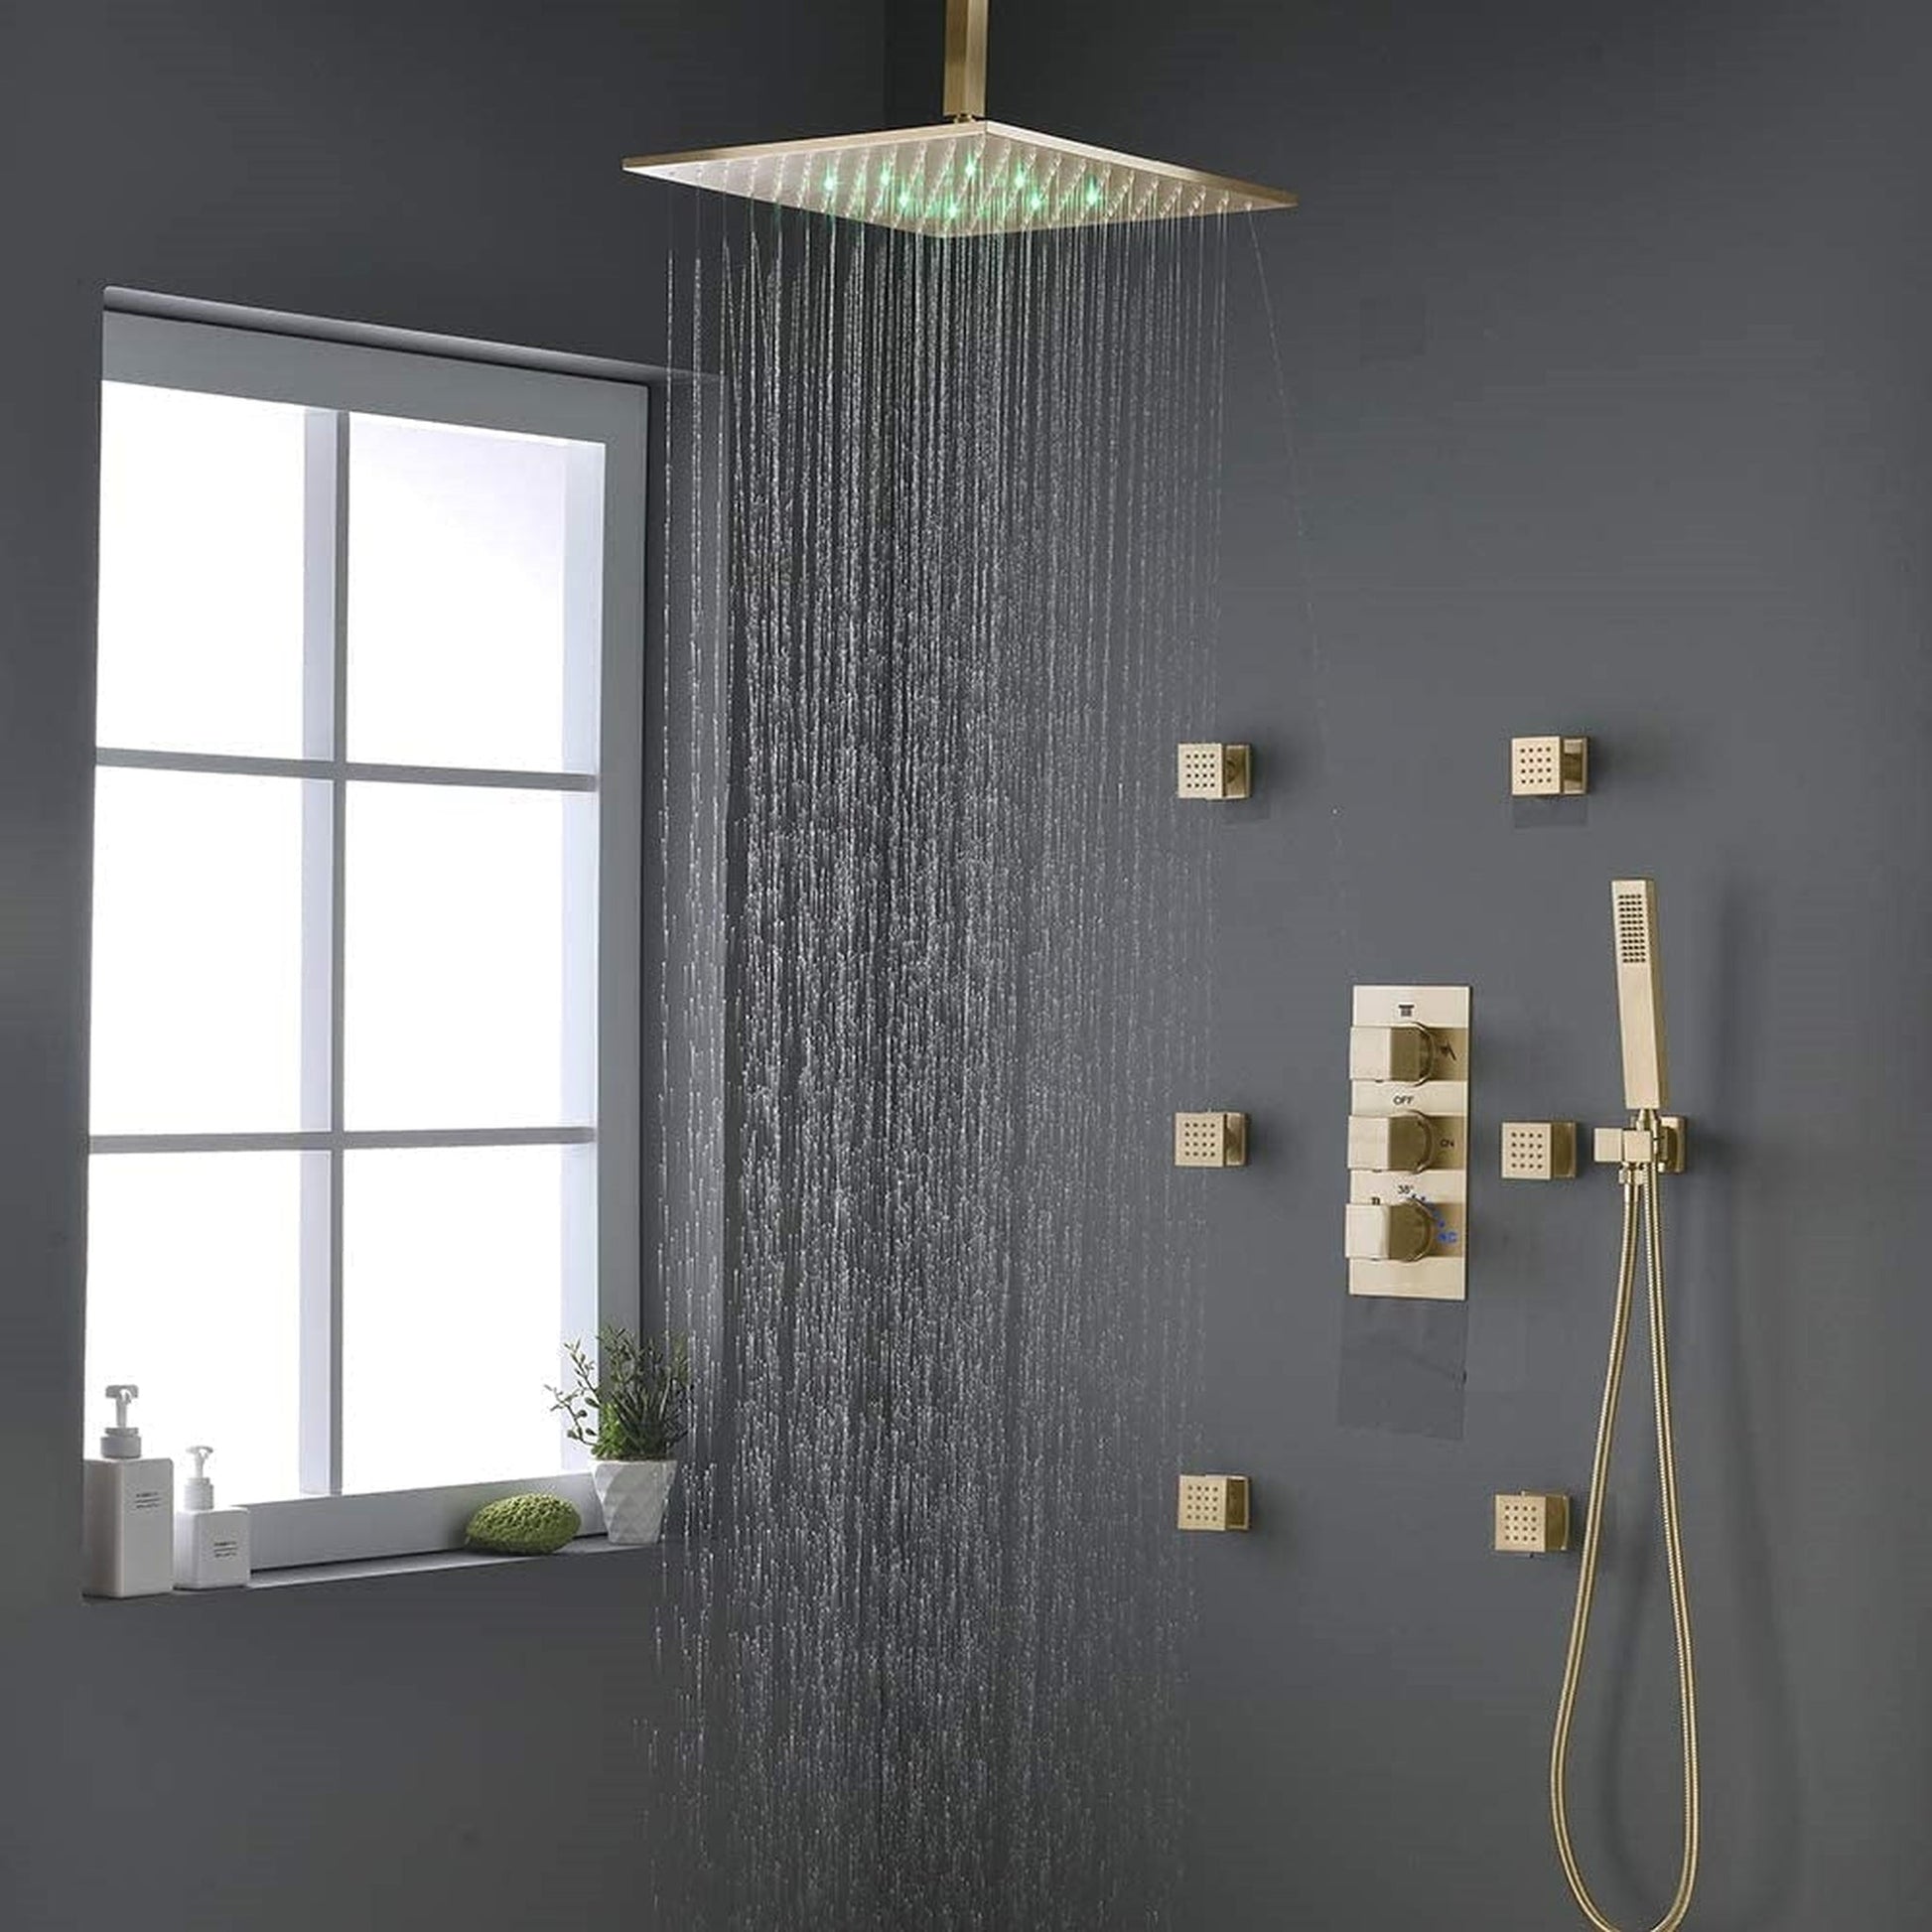 FontanaShowers Verona Creative Luxury 16" Brushed Gold Square Ceiling Mounted Thermostatic Button Mixer Rainfall Shower System With 6-Jet Body Sprays and Hand Shower